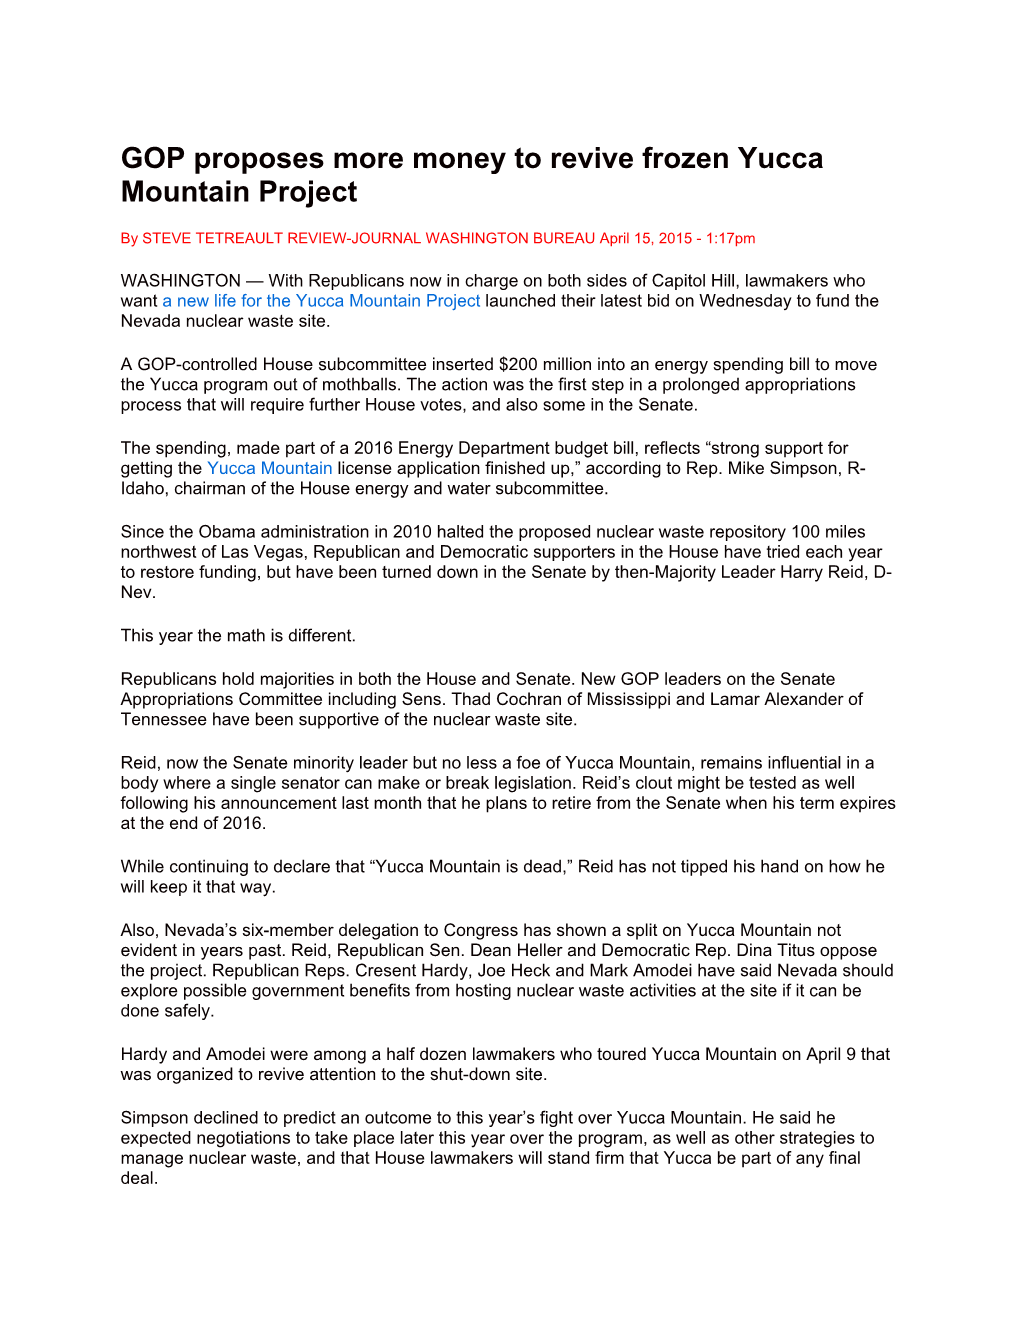 GOP Proposes More Money to Revive Frozen Yucca Mountain Project